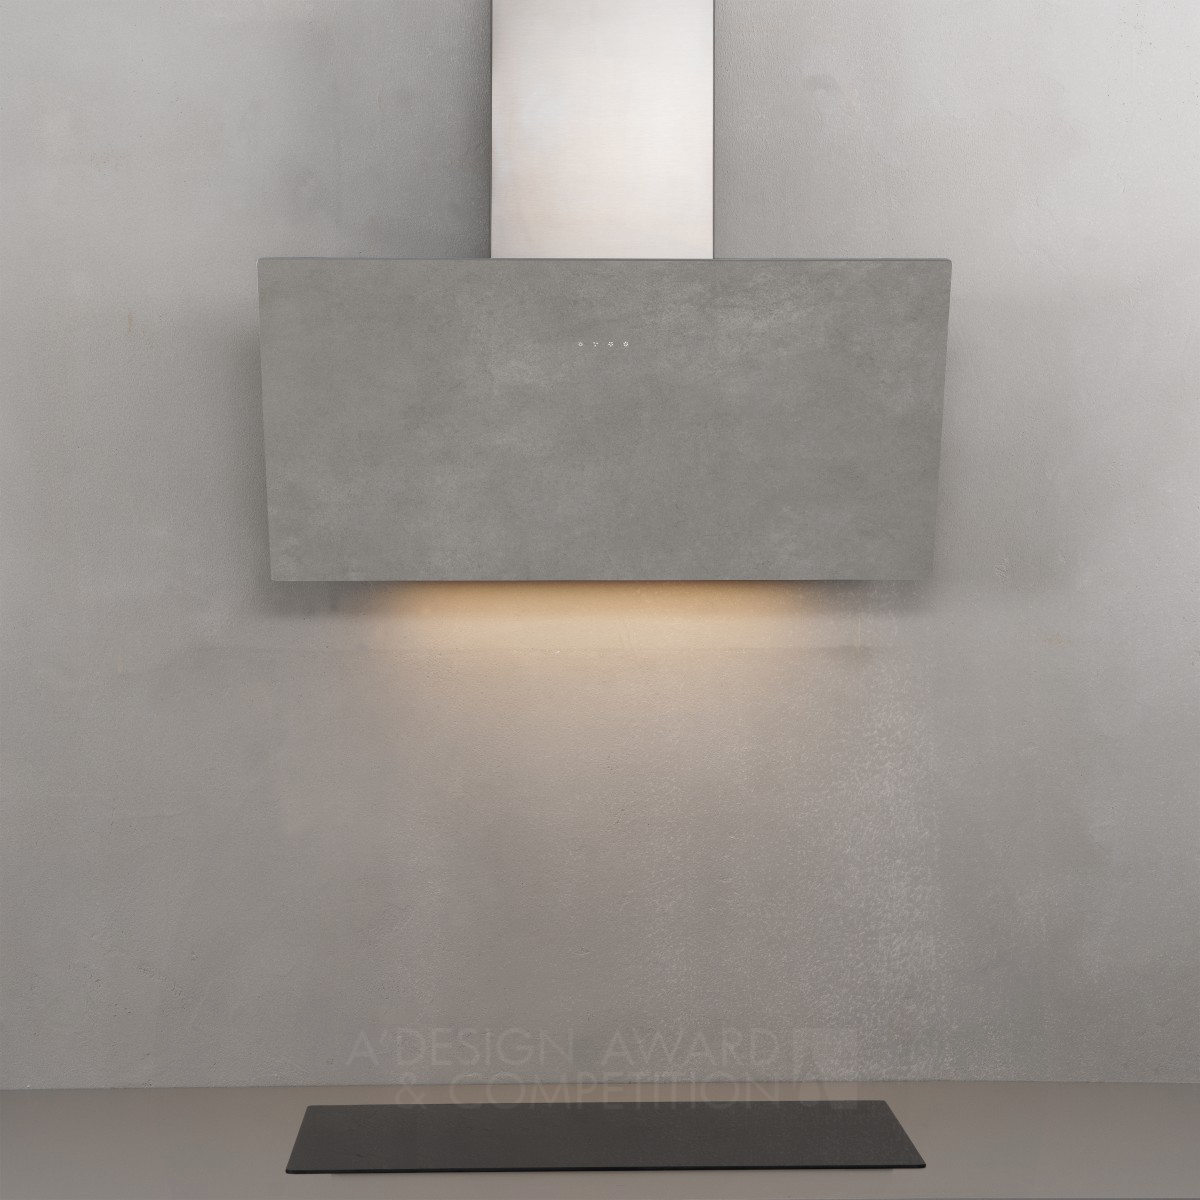 Strong Wall Mounted Range Hood by Silverline Design Team